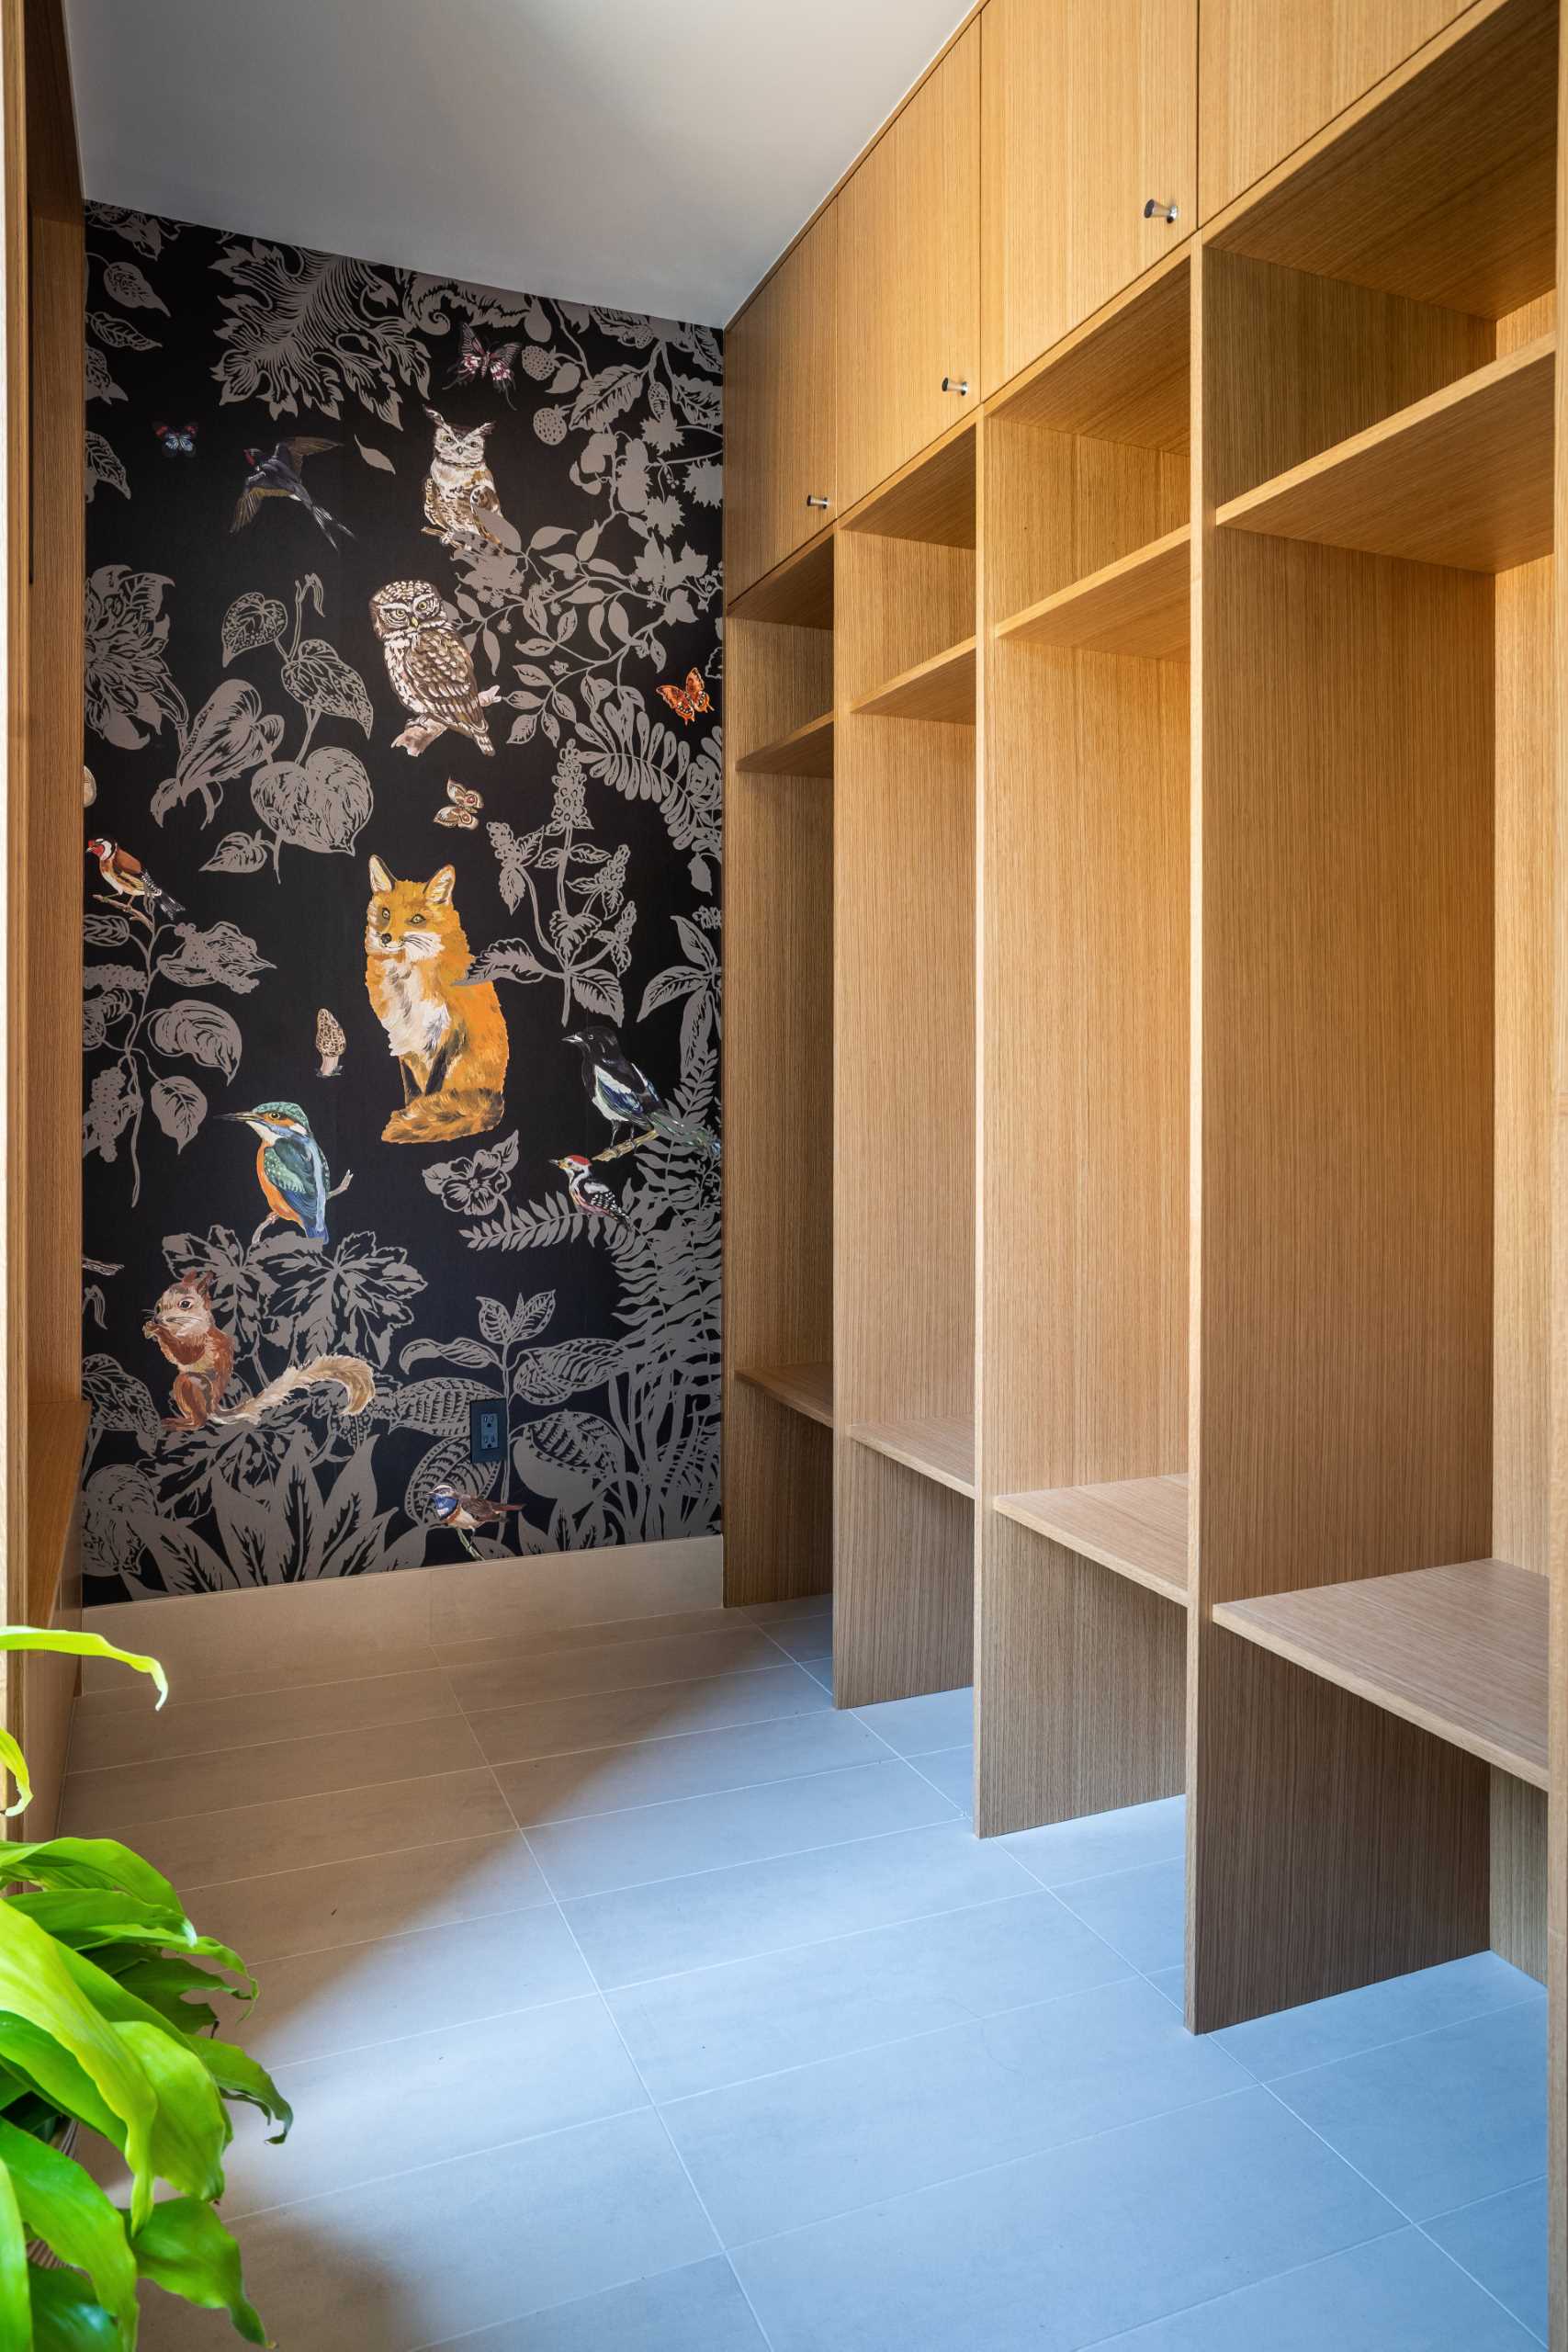 In this mudroom, custom floor-to-ceiling cabinets and shelving take up the wall, while a nature-inspired wallpaper adds an artistic element. Opposite the cabinetry is a pegboard wall that includes hooks that can be moved when needed.